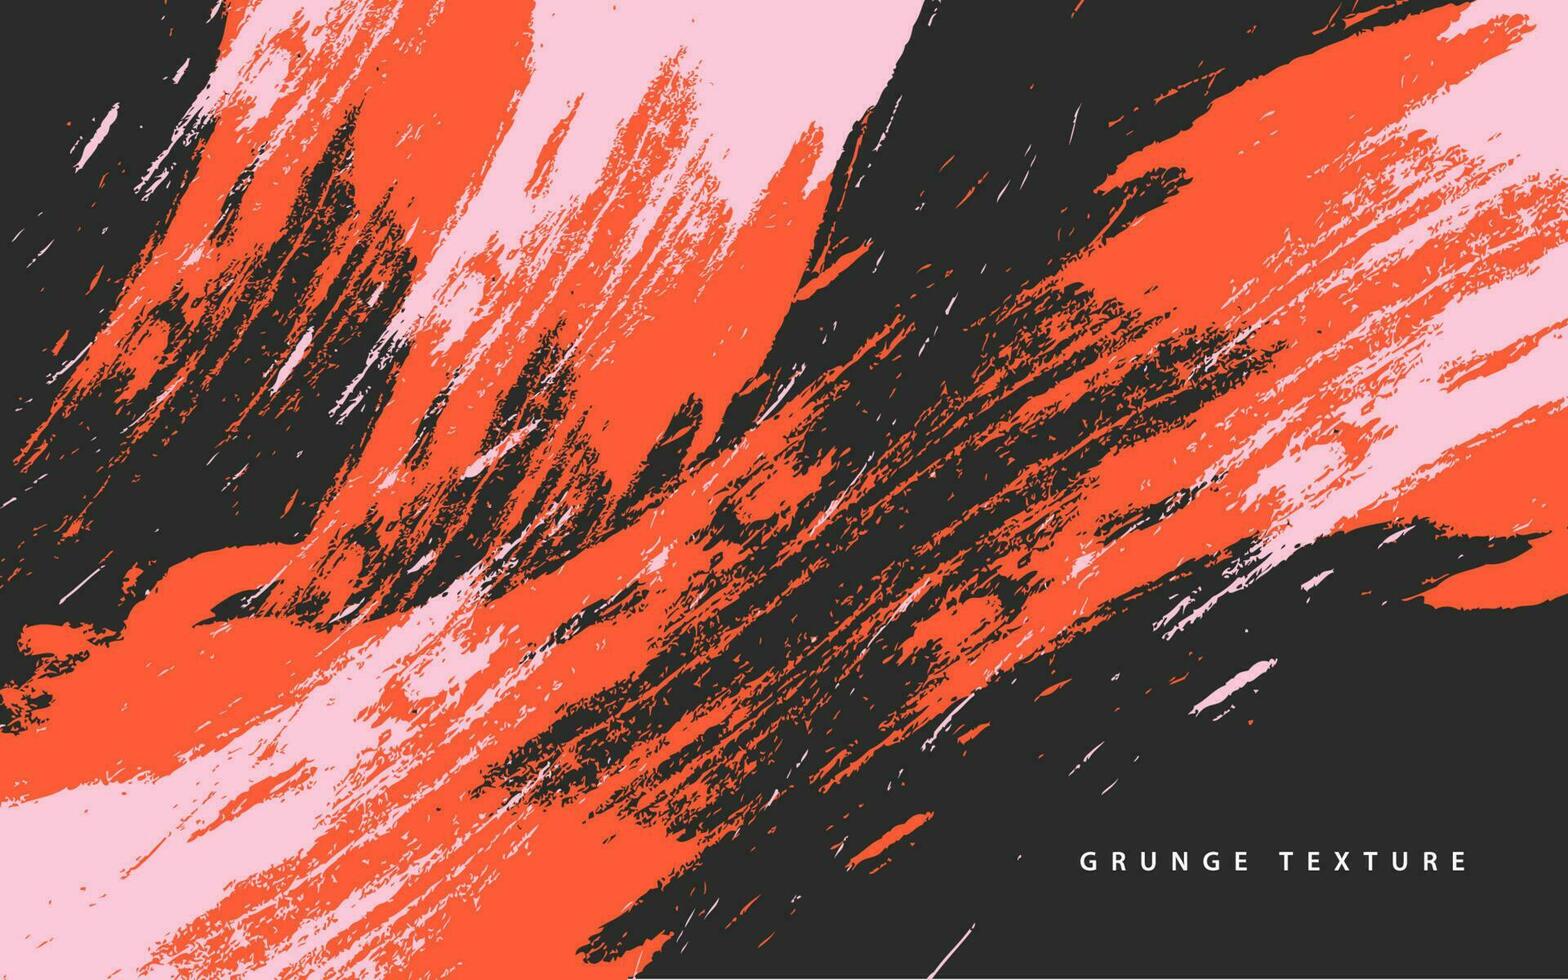 Abstract grunge texture paintbrush black and red background vector